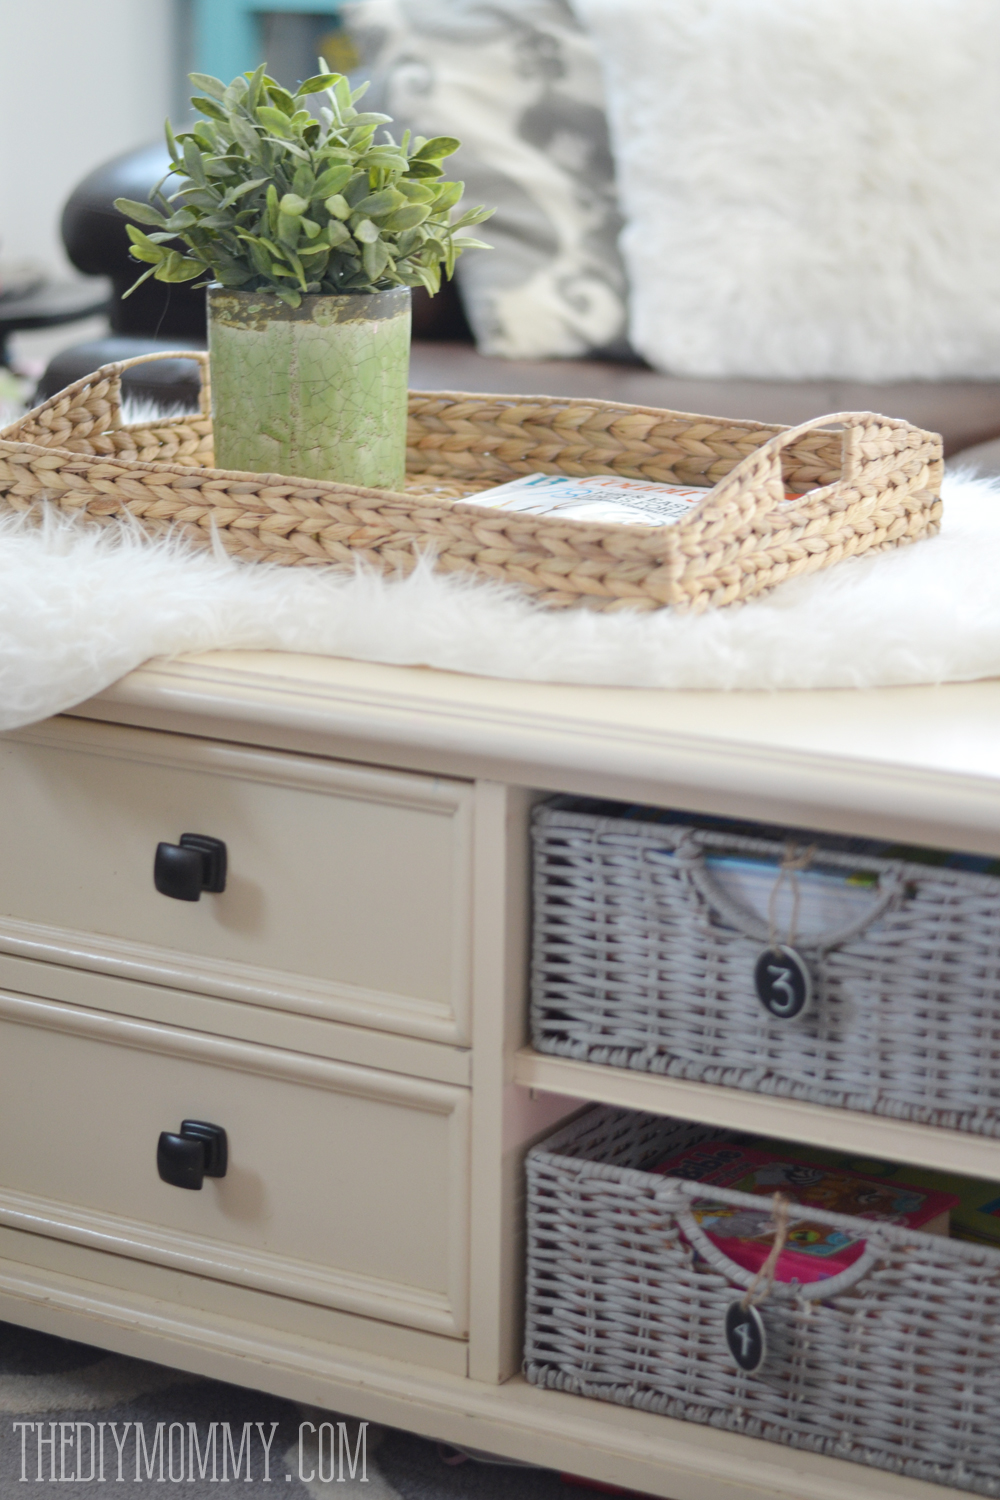 How to paint wicker baskets with Chalk Paint - An Easy Coffee Table Makeover